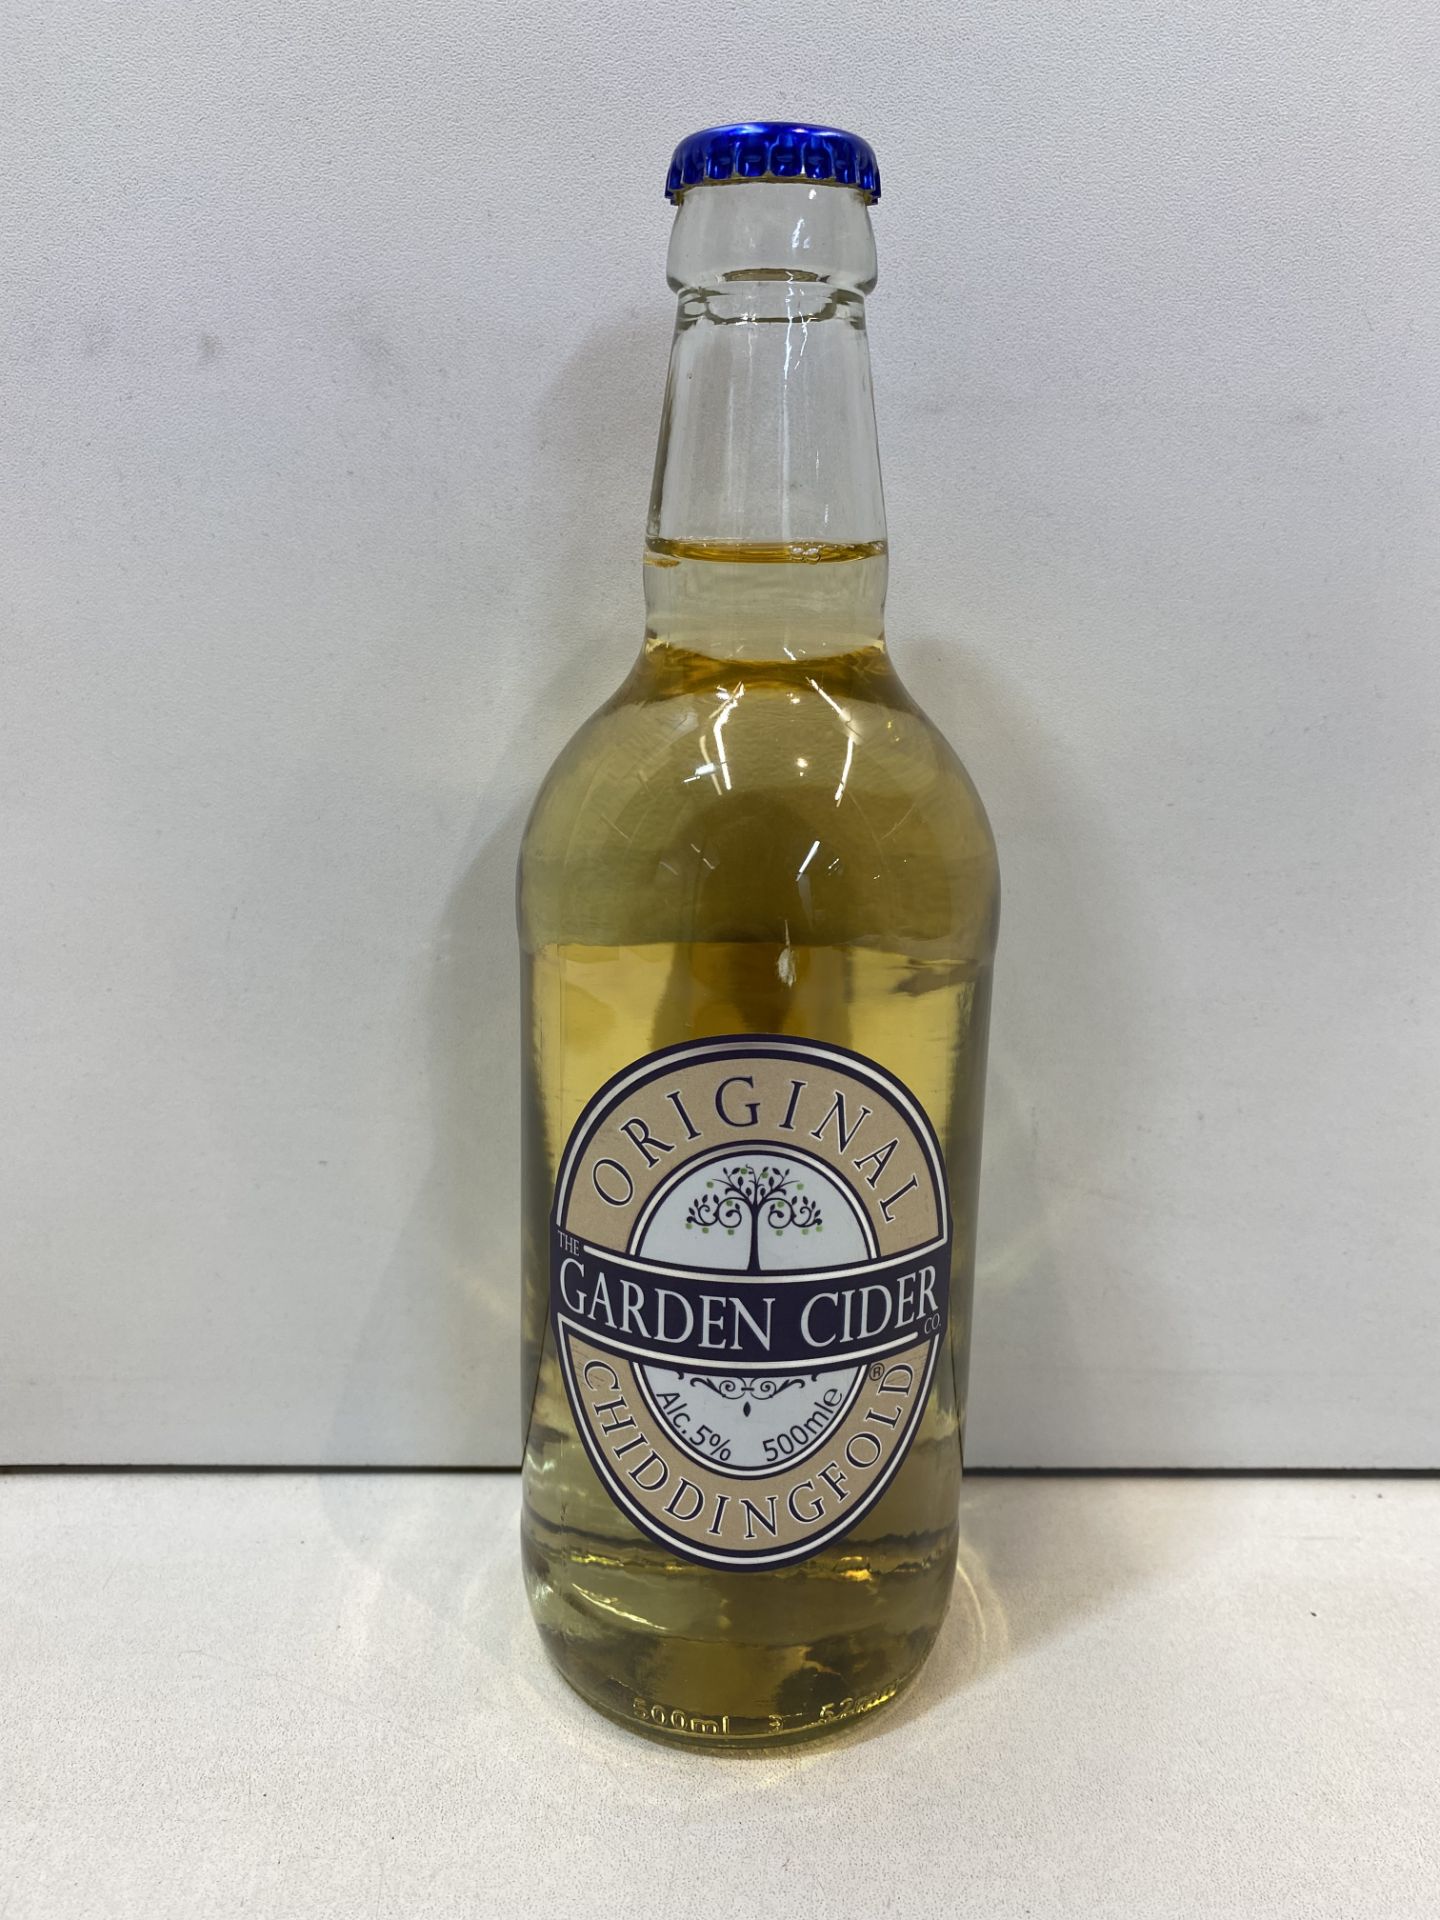 20 x Bottles Of Various The Garden Cider Company Ciders - OUT OF DATE - Best Before 03/22 See Photos - Image 2 of 3